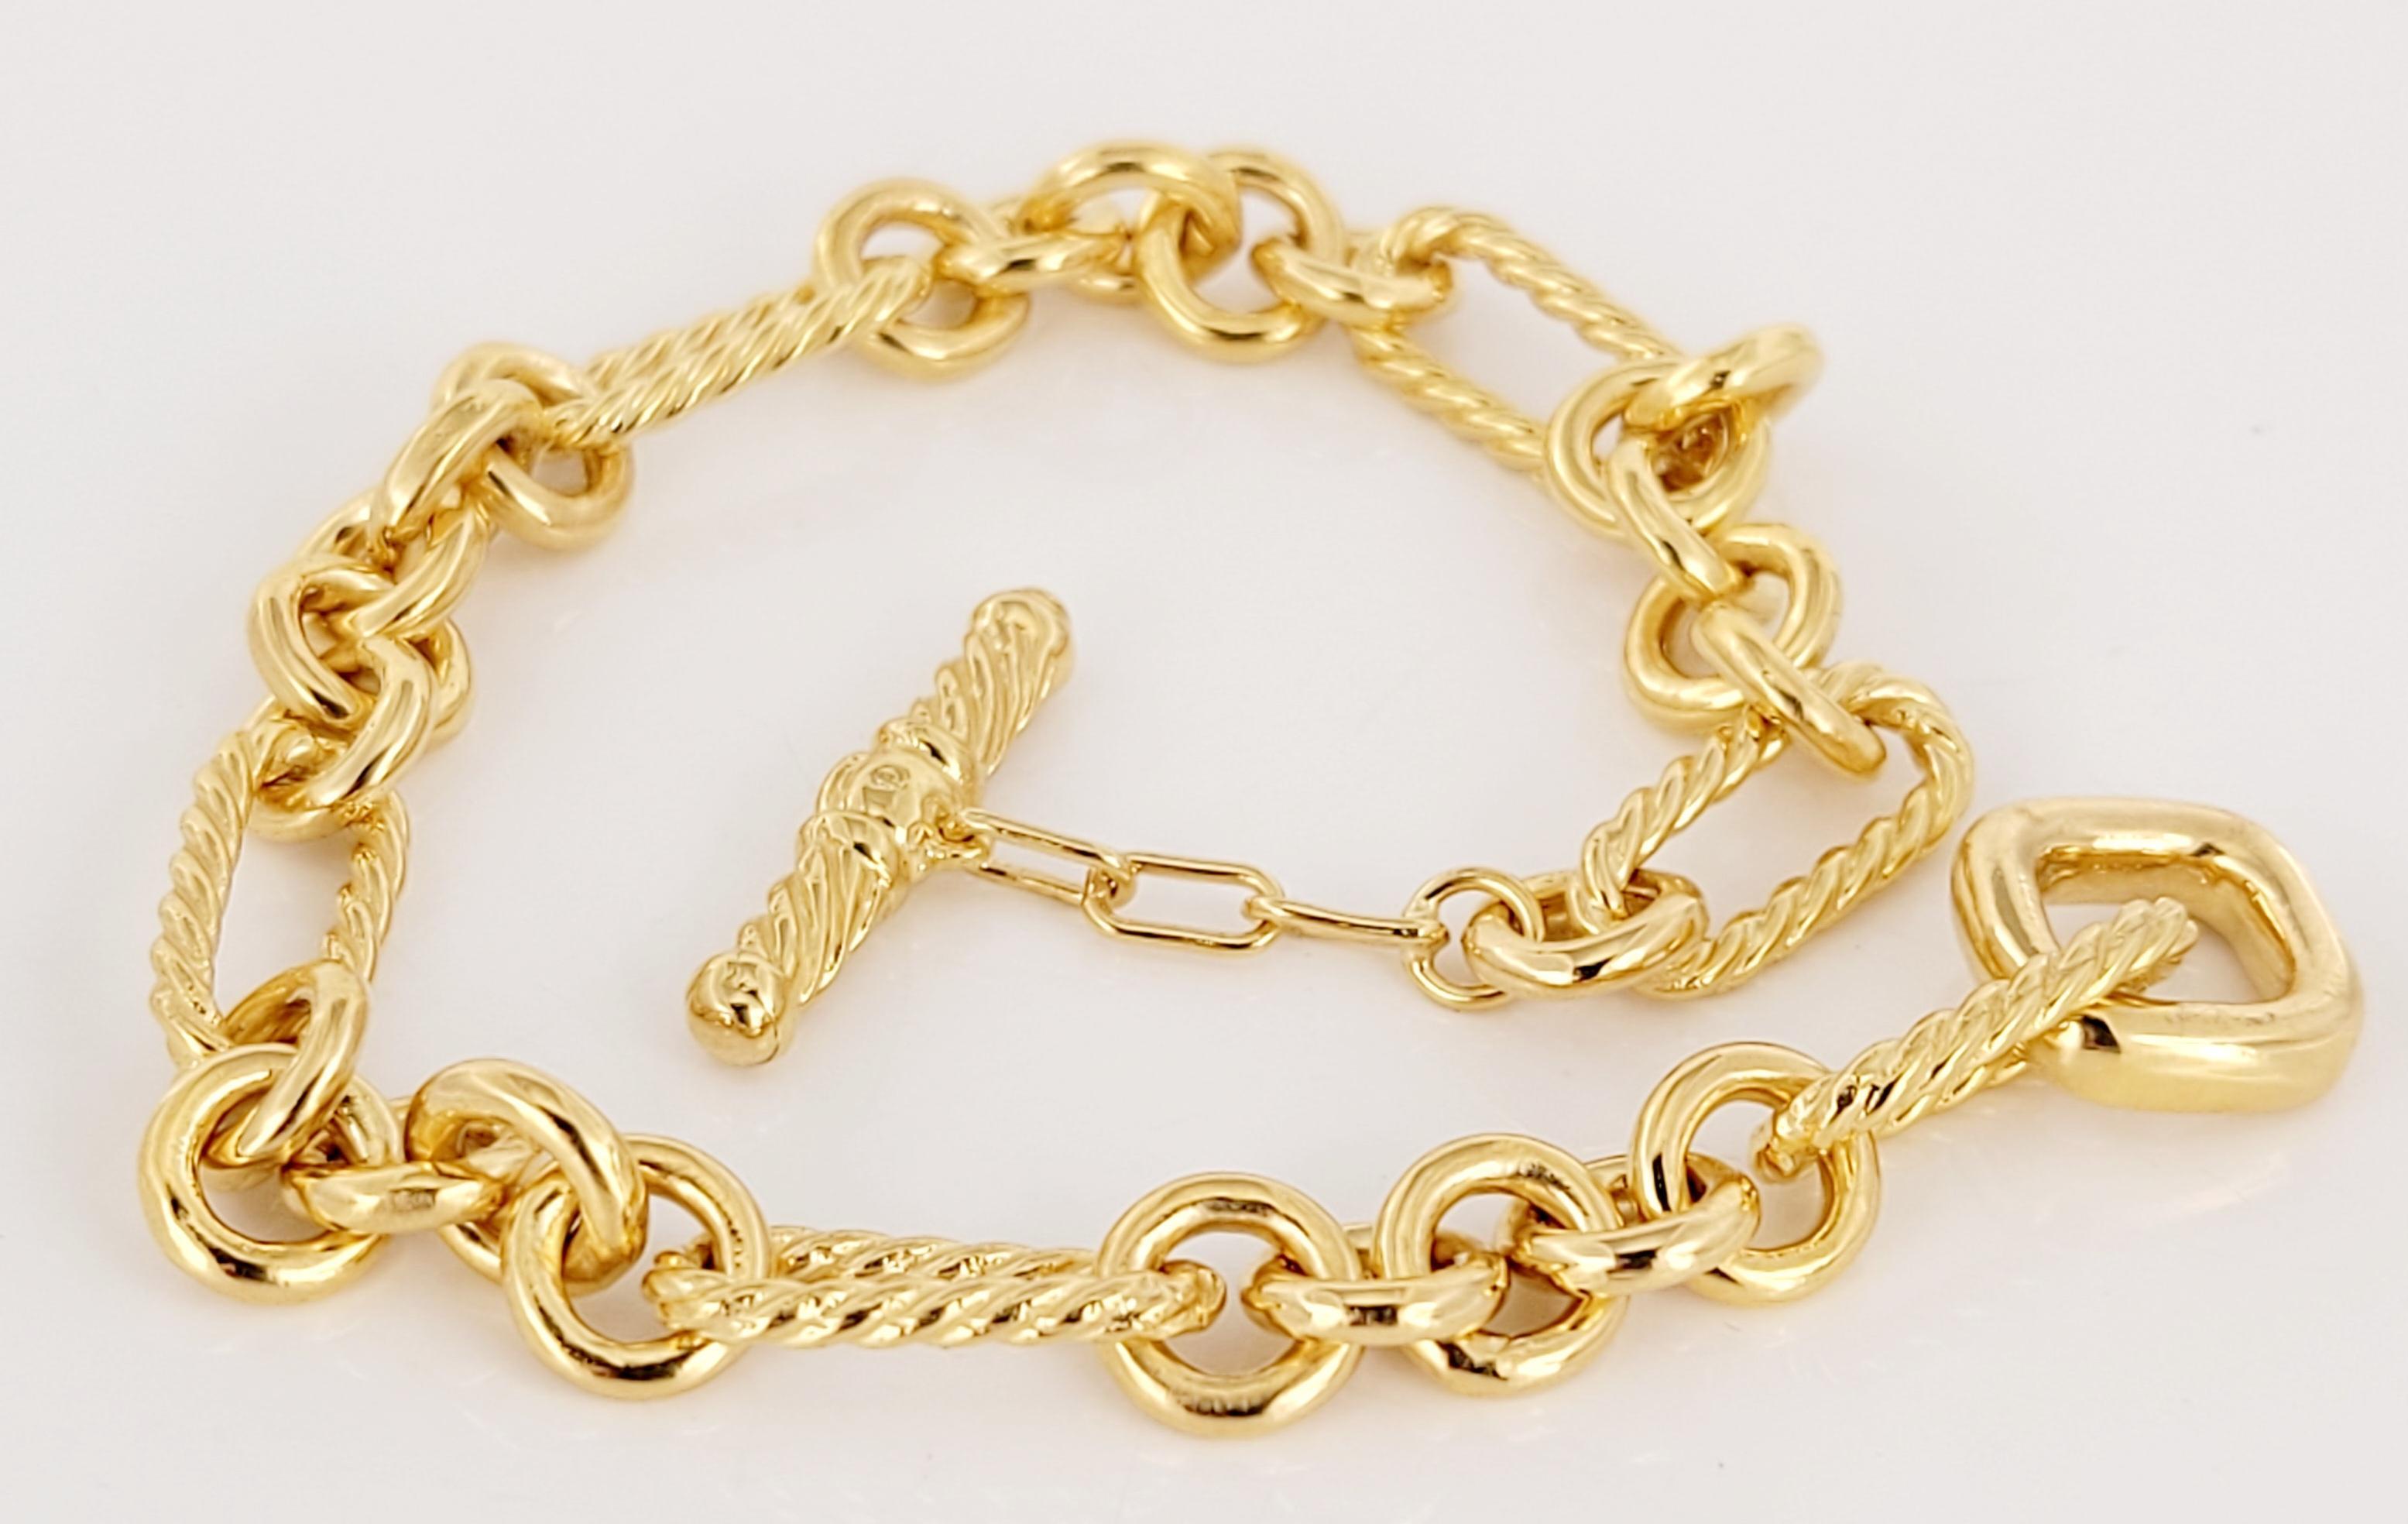 Brand David Yurman
Style: Cable Figaro Link 
Type: Bracelet
Metal: Yellow Gold 
Purity 18K
Bracelet Length 8'' Long
Weight 29.5gr 
Comes with David Yurman pouch
Retail Price $4.250